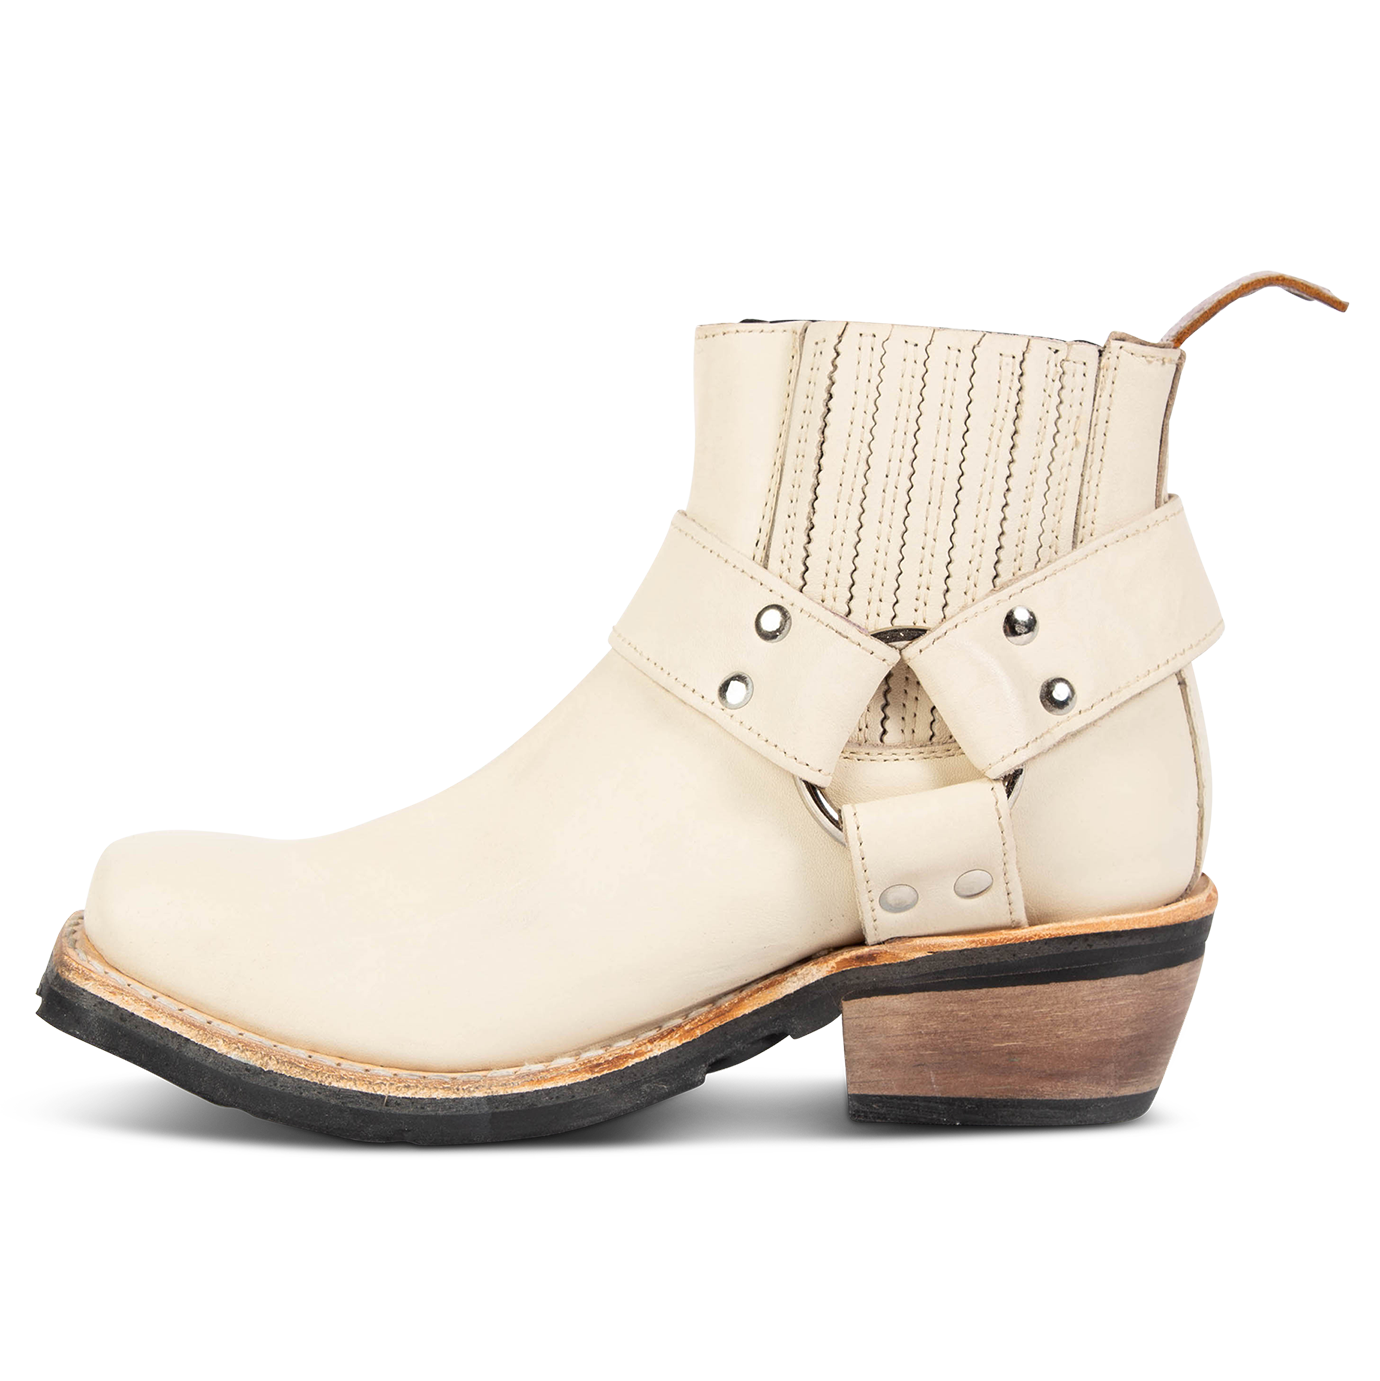 Inside view showing gore construction and leather ankle harness with silver hardware on FREEBIRD women's Whiskey beige ankle bootie